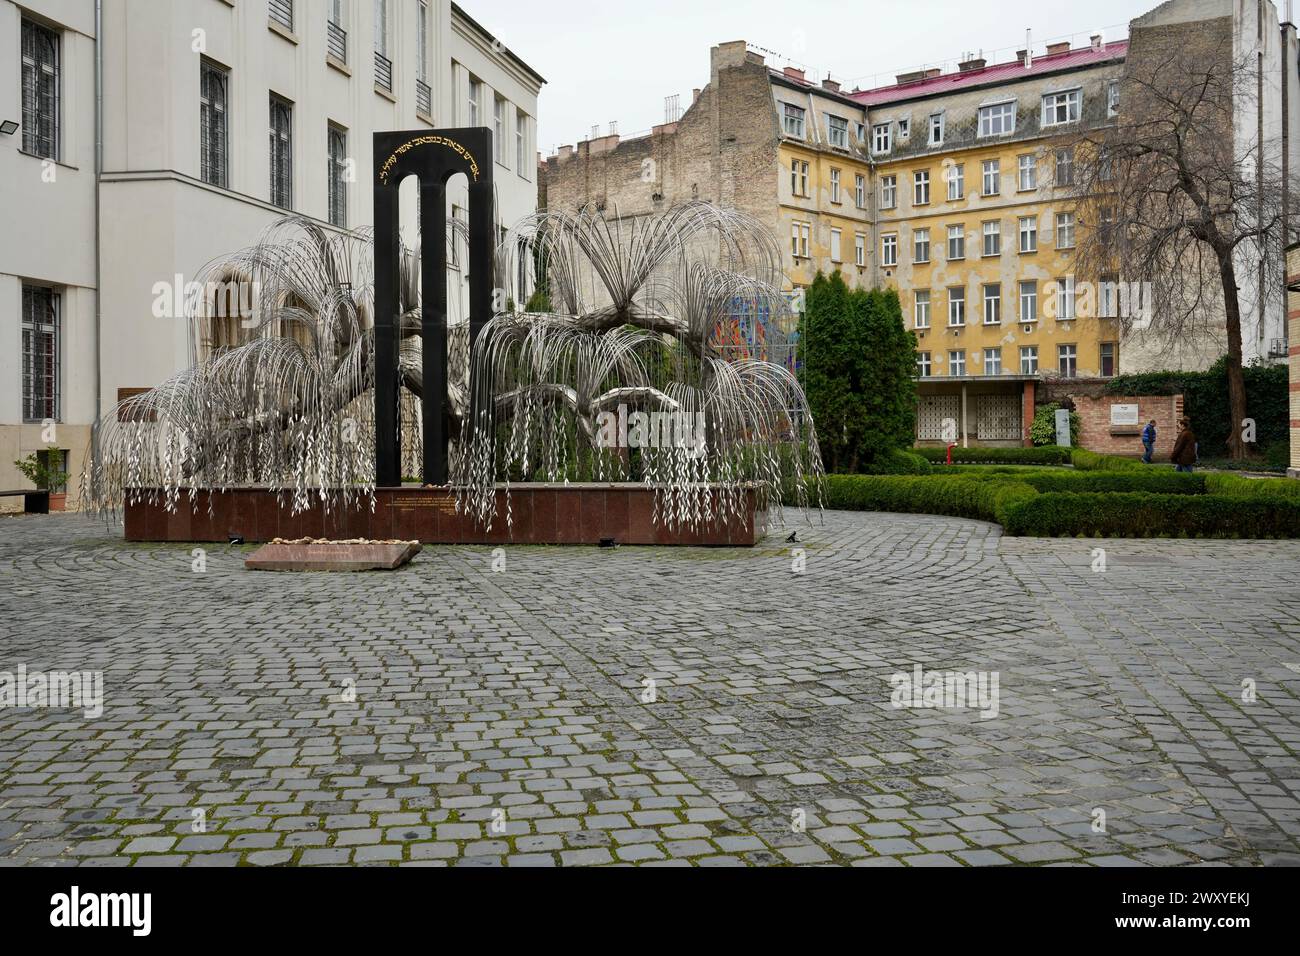 The Memorial of the Hungarian Jewish Martyrs in the Raoul Wallenberg Holocaust Memorial Park at Dohány Street Synagogue. Stock Photo